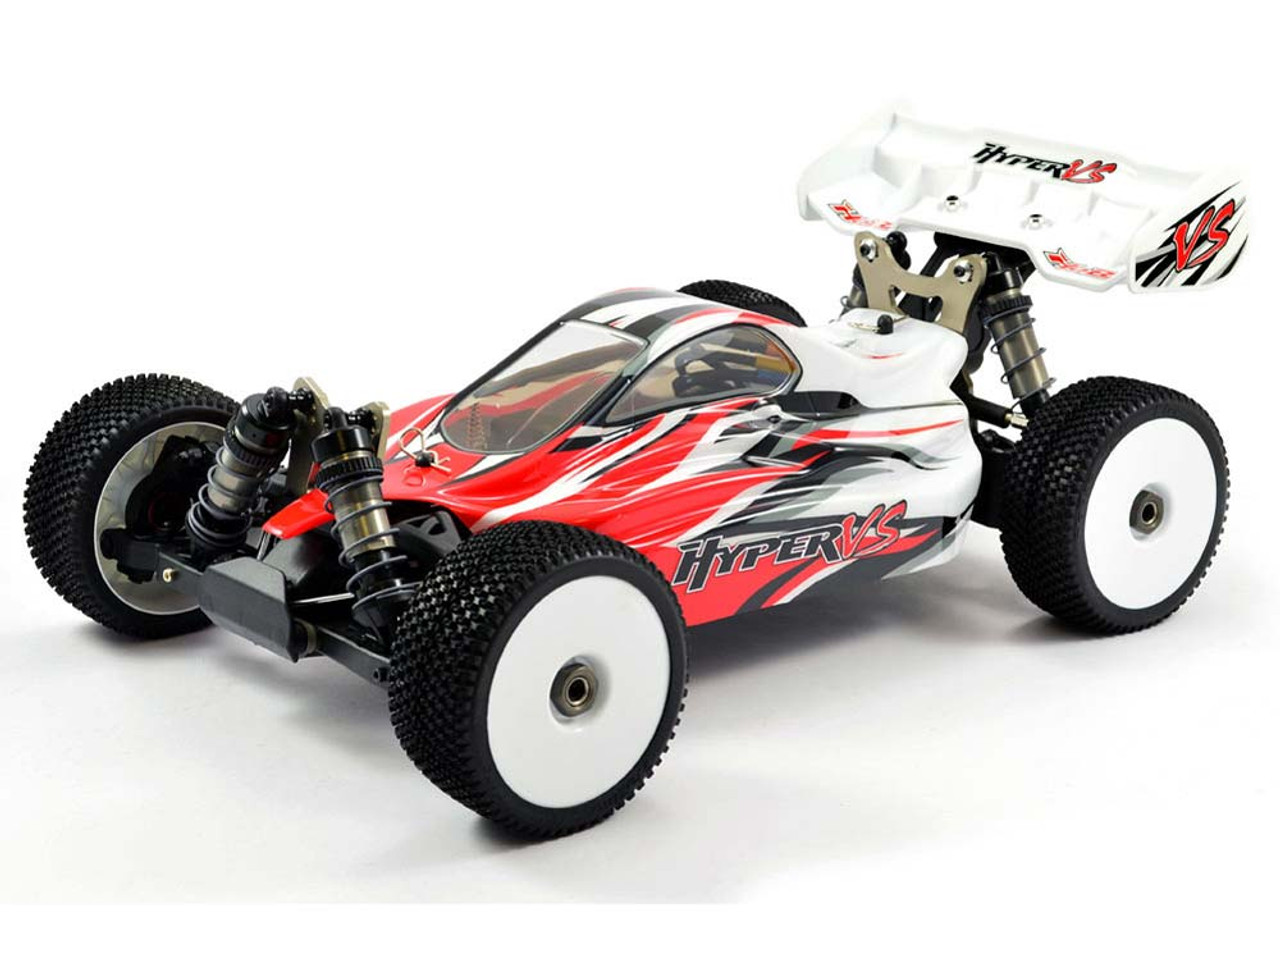 HoBao Hyper VSe Buggy 1:8 Scale Brushless Electric RTR